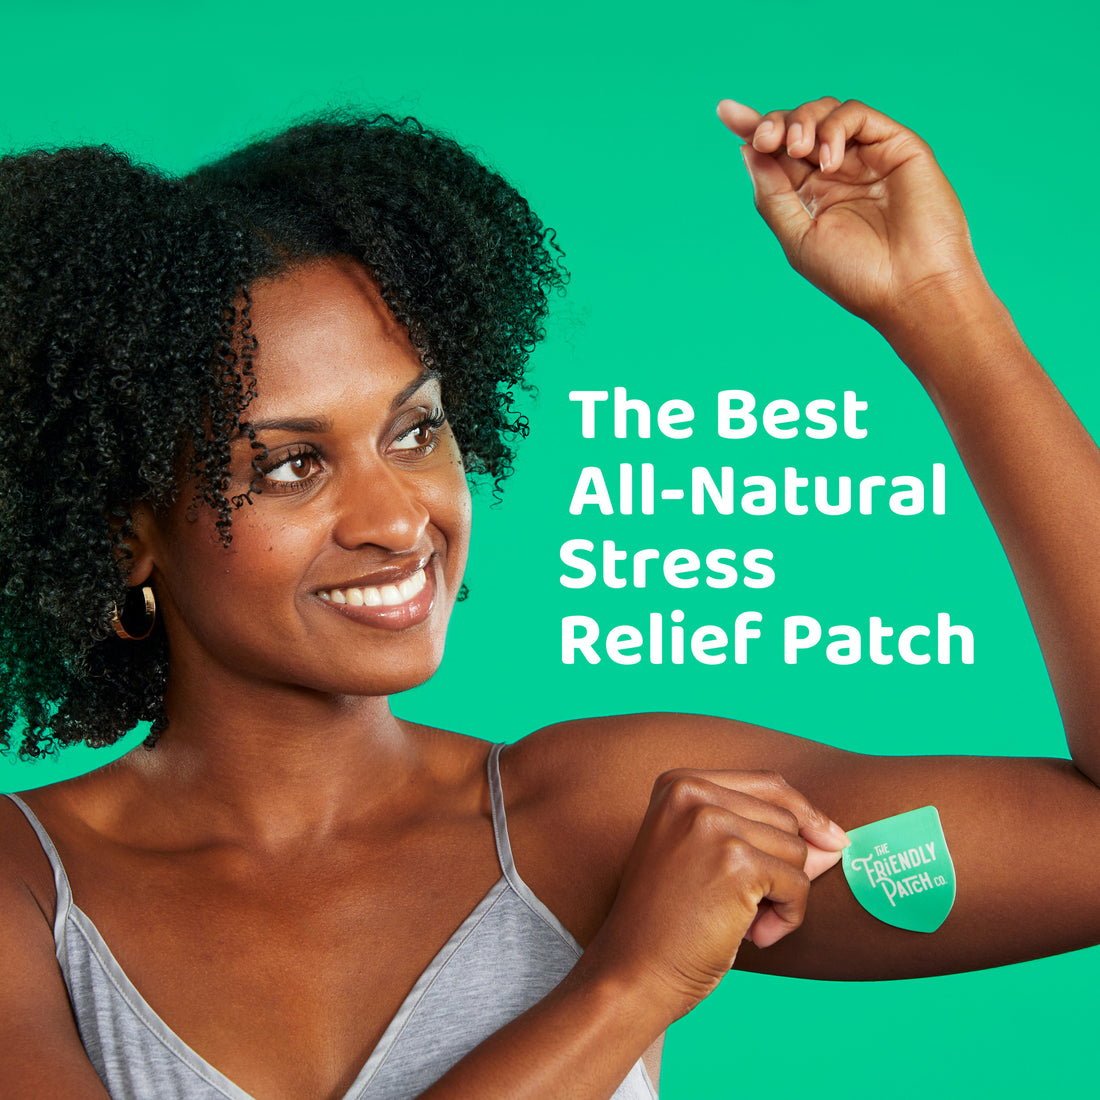 The Best All-Natural Stress Relief Patch